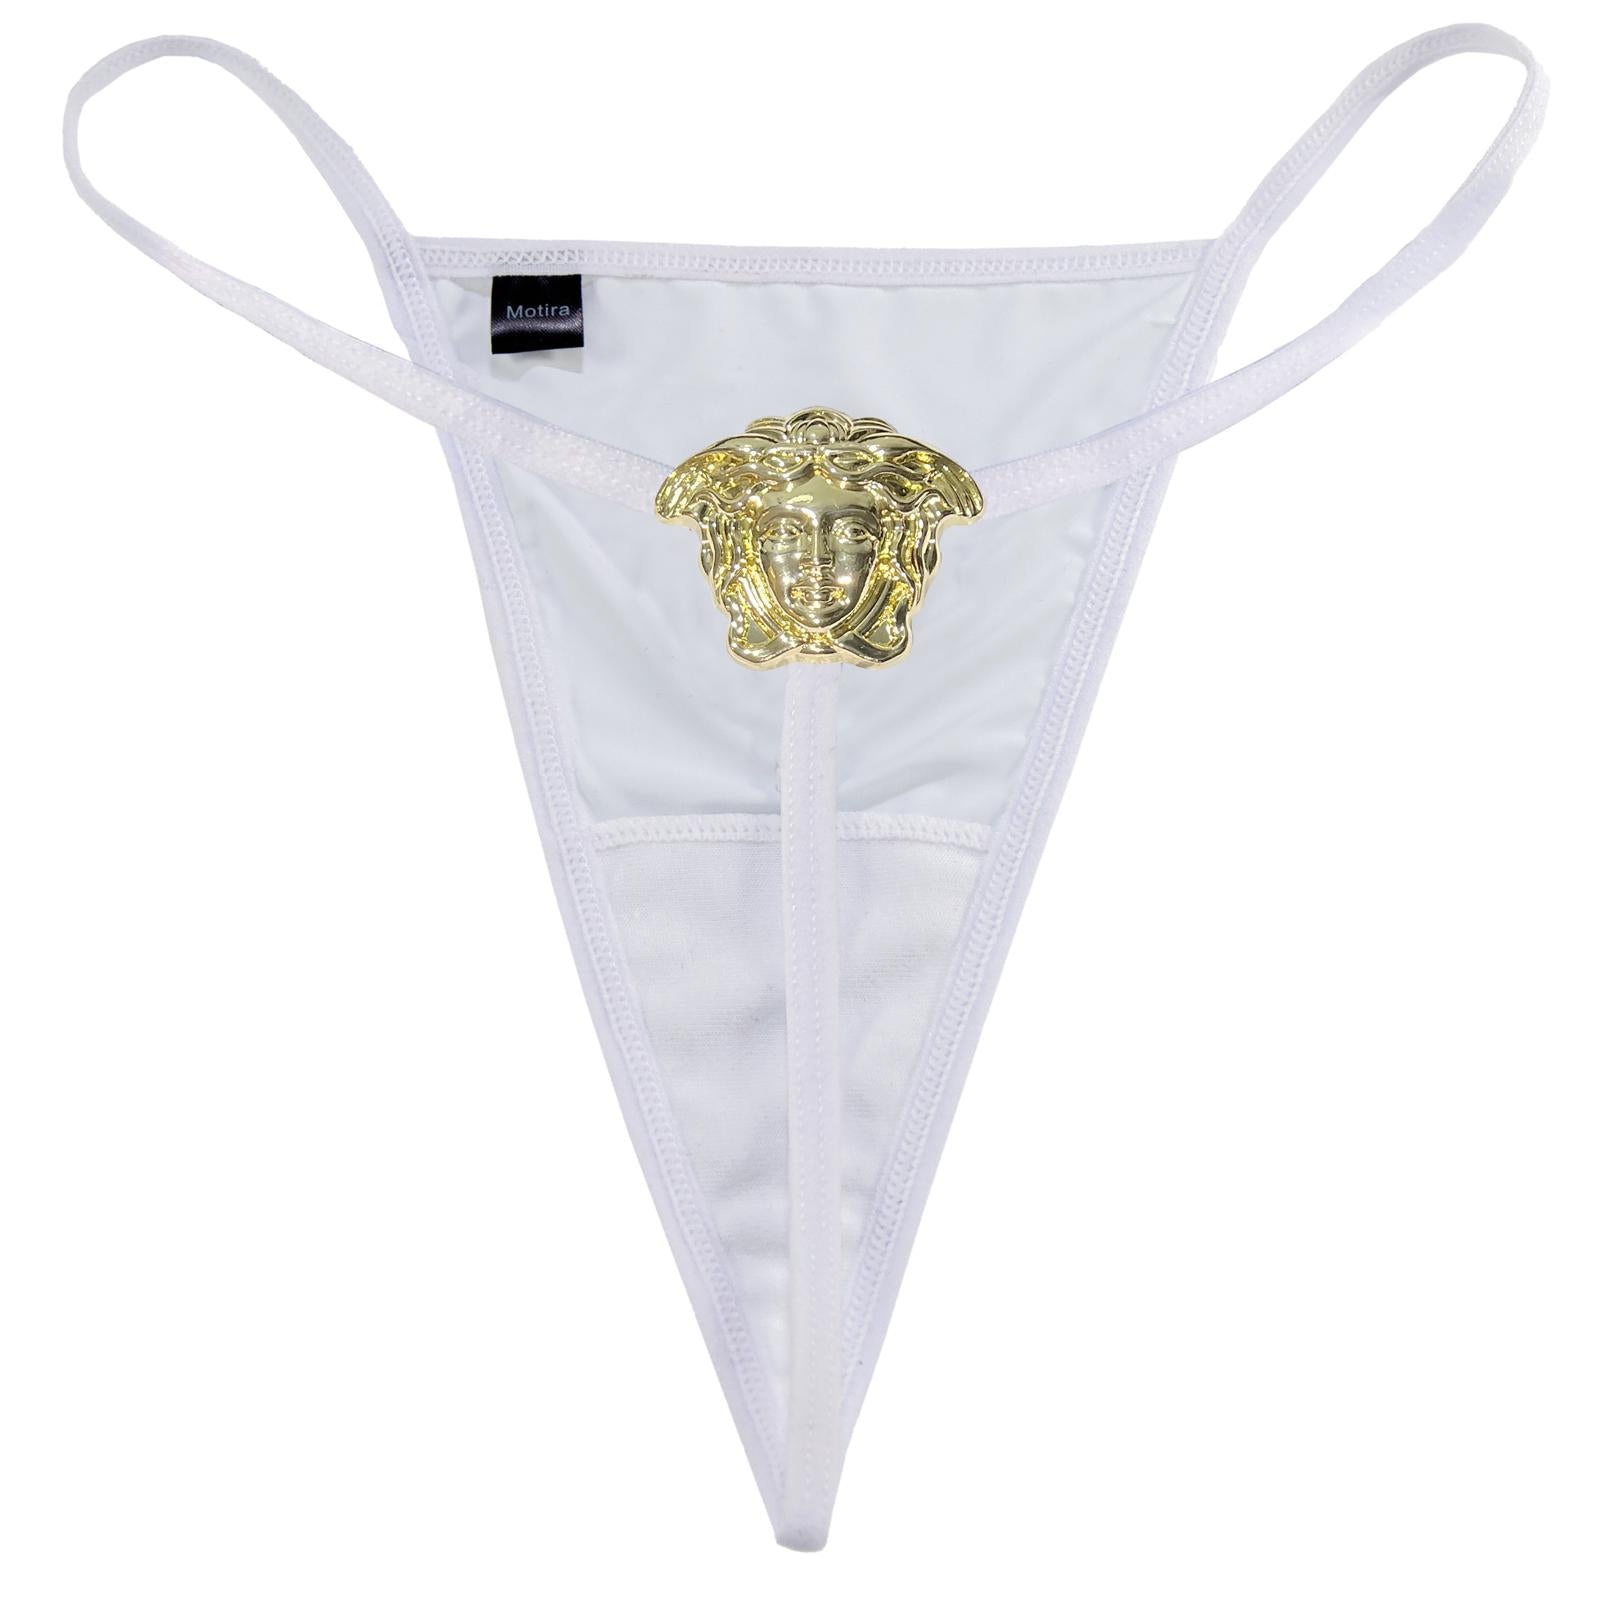 Versace thongs white color buy on PRM